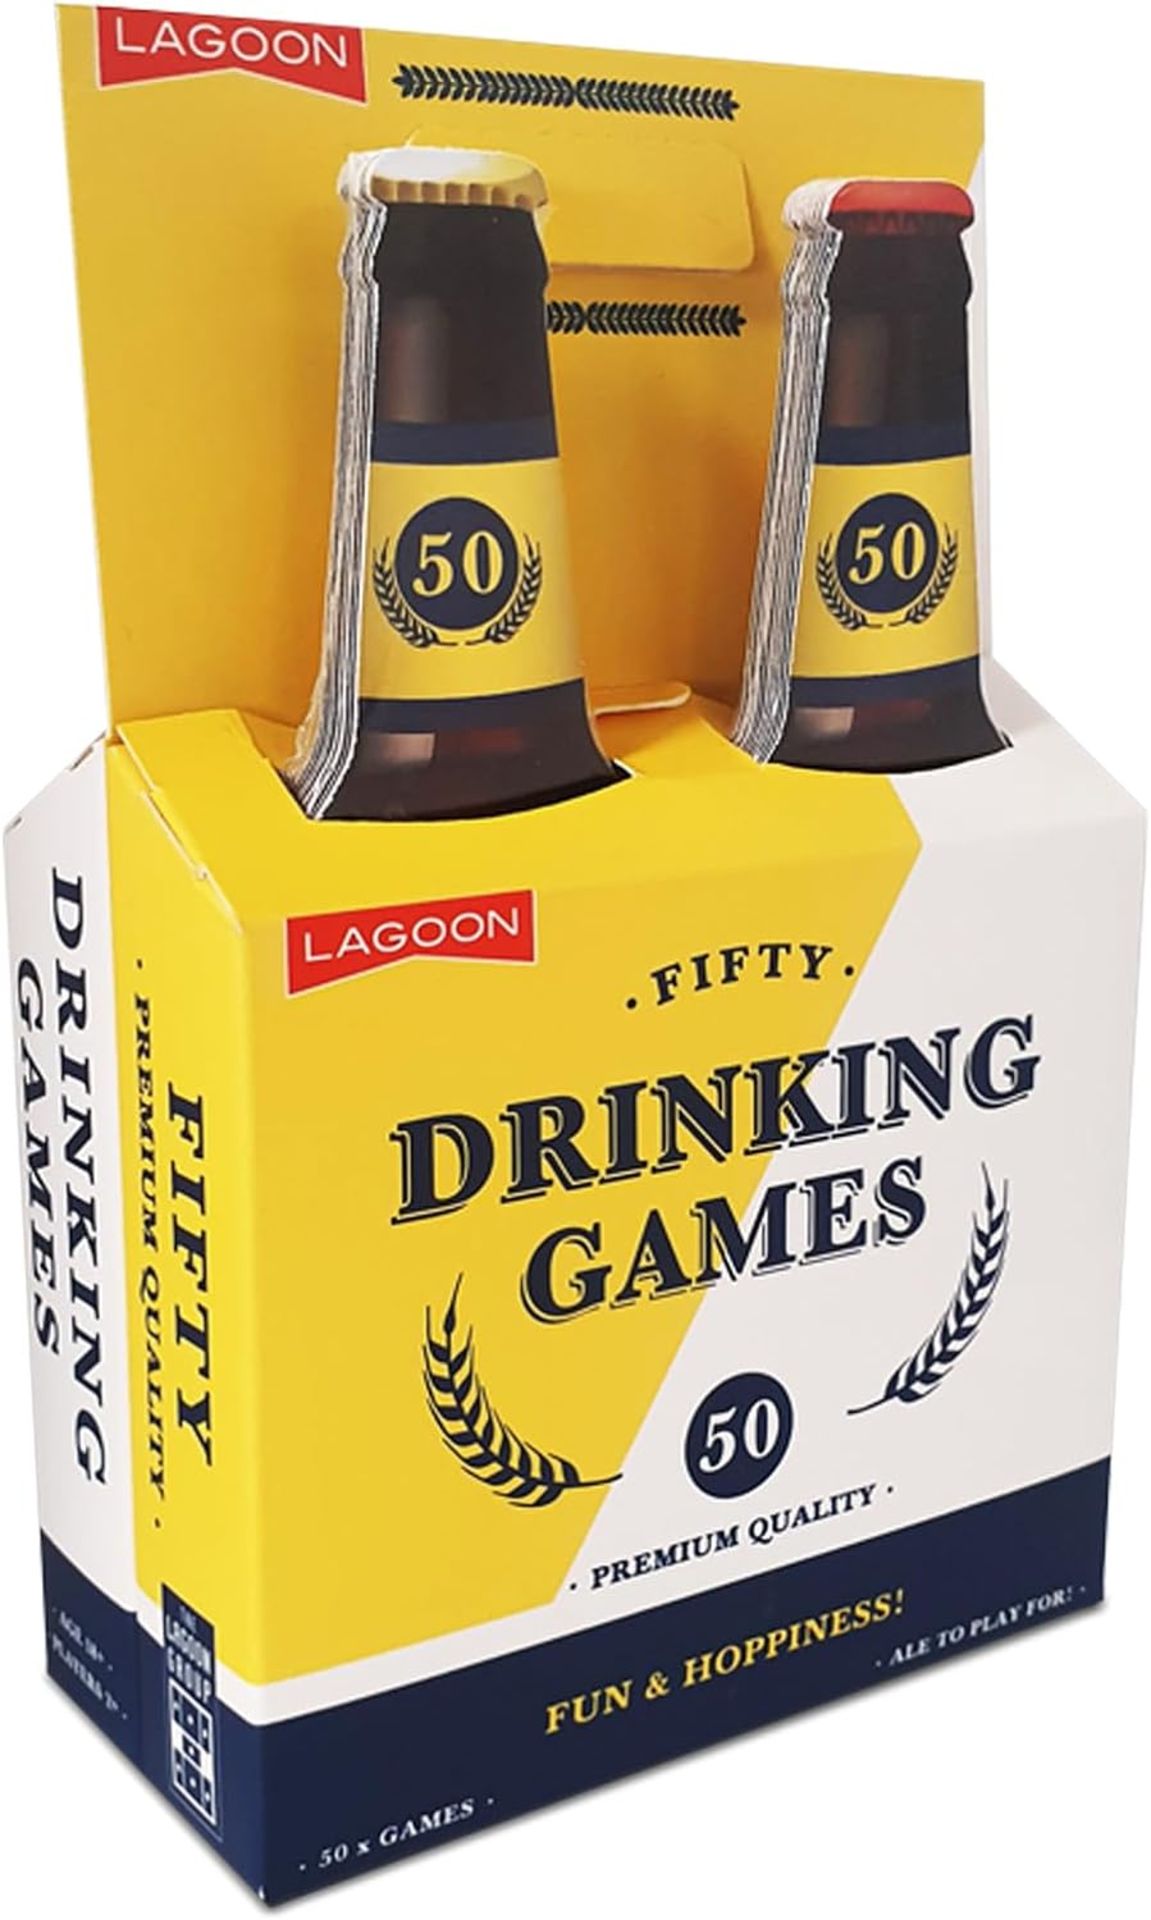 100 X NEW FIFTY DRINKING GAMES - Image 3 of 4